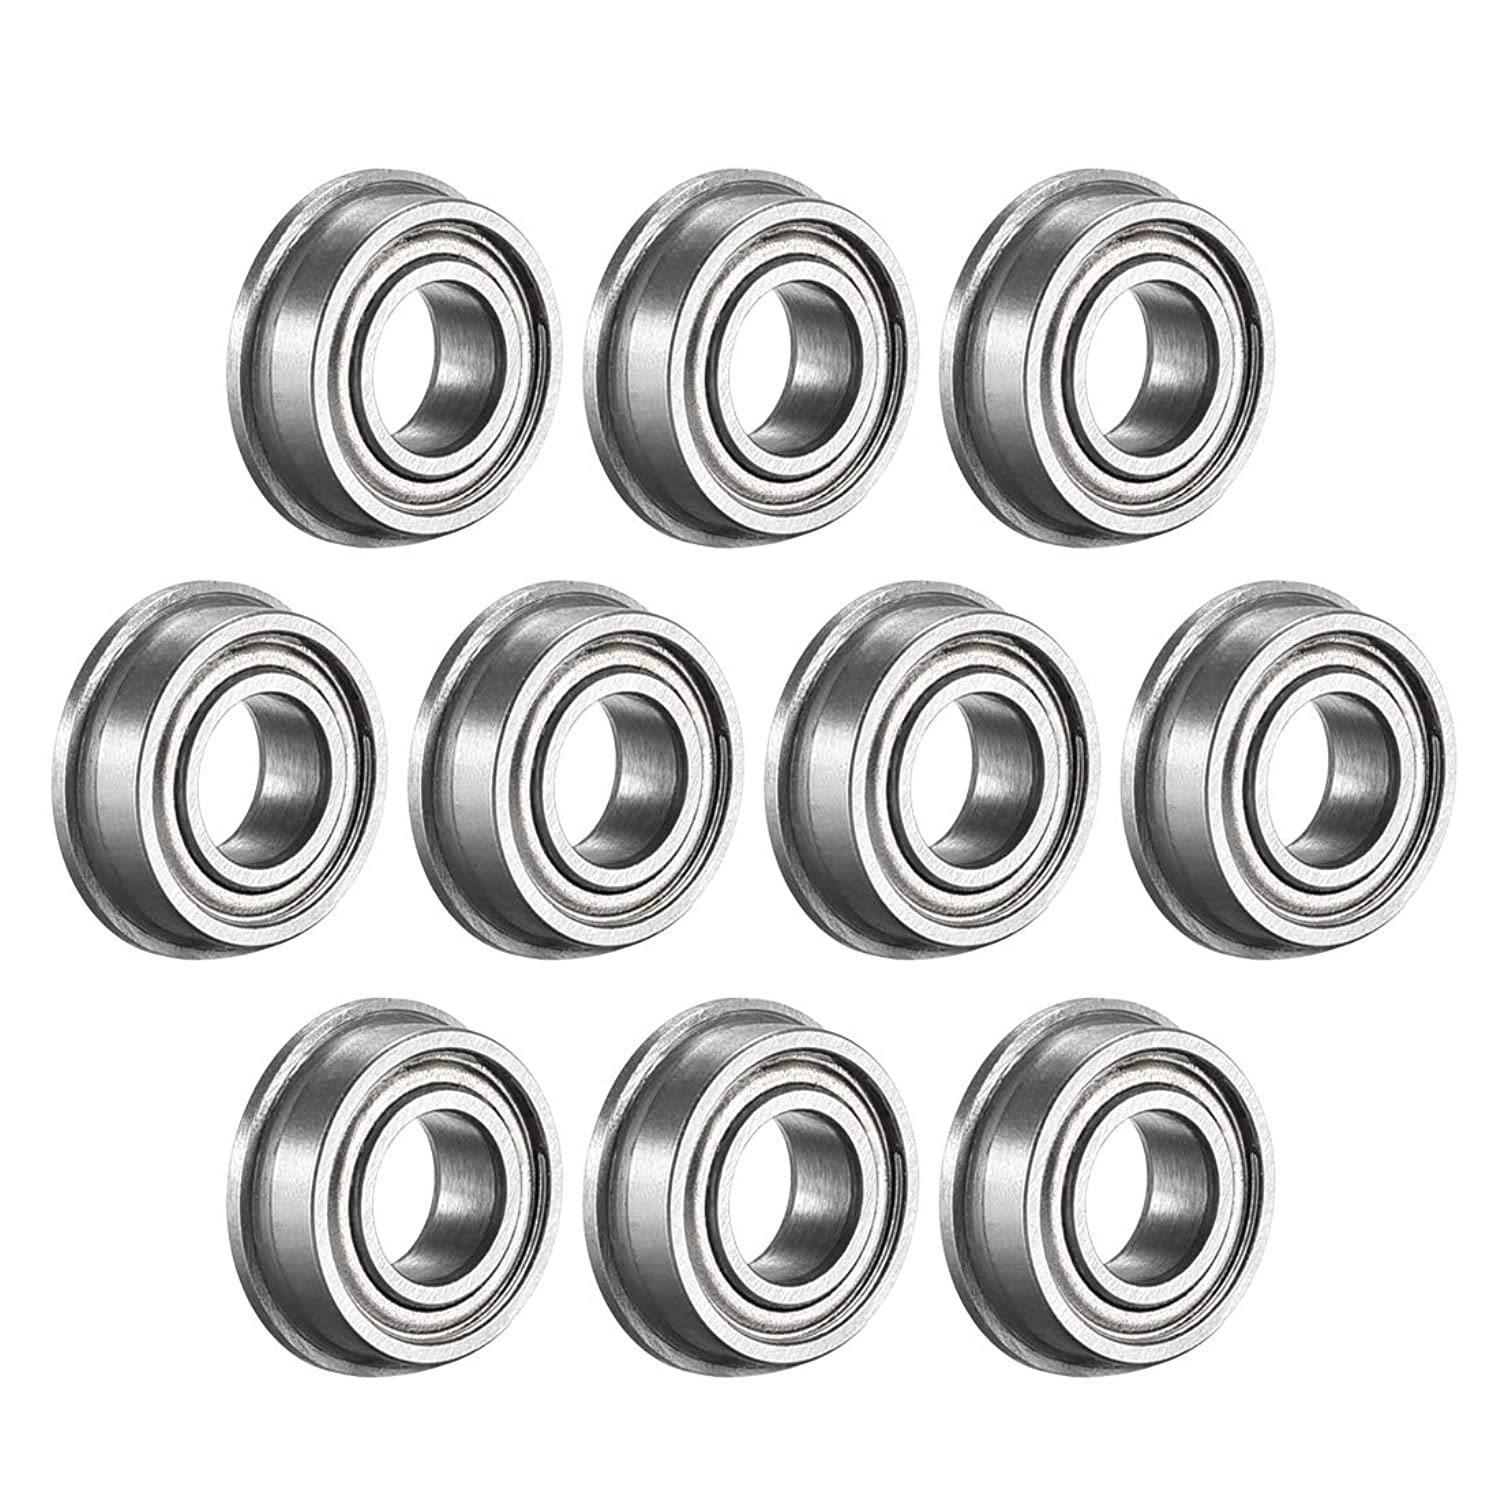 uxcell FR166ZZ Flanged Ball Bearing 3/16" x 3/8" x 1/8" Inch Double Metal Shielded